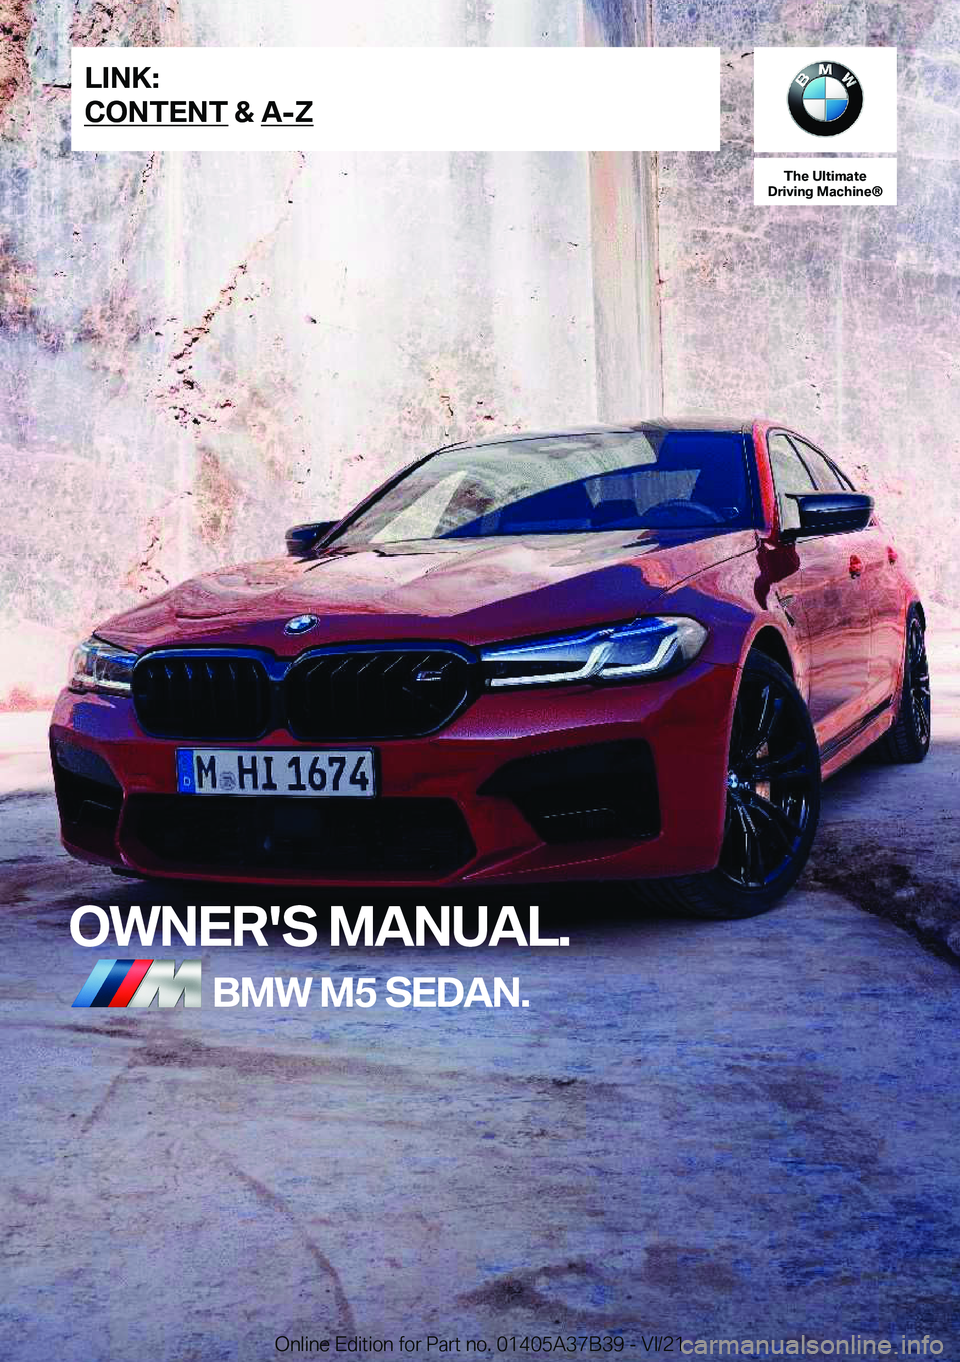 BMW M5 2022  Owners Manual �T�h�e��U�l�t�i�m�a�t�e
�D�r�i�v�i�n�g��M�a�c�h�i�n�e�n
�O�W�N�E�R�'�S��M�A�N�U�A�L�.�B�M�W��M�5��S�E�D�A�N�.�L�I�N�K�:
�C�O�N�T�E�N�T��&��A�-�Z�O�n�l�i�n�e��E�d�i�t�i�o�n��f�o�r��P�a�r�